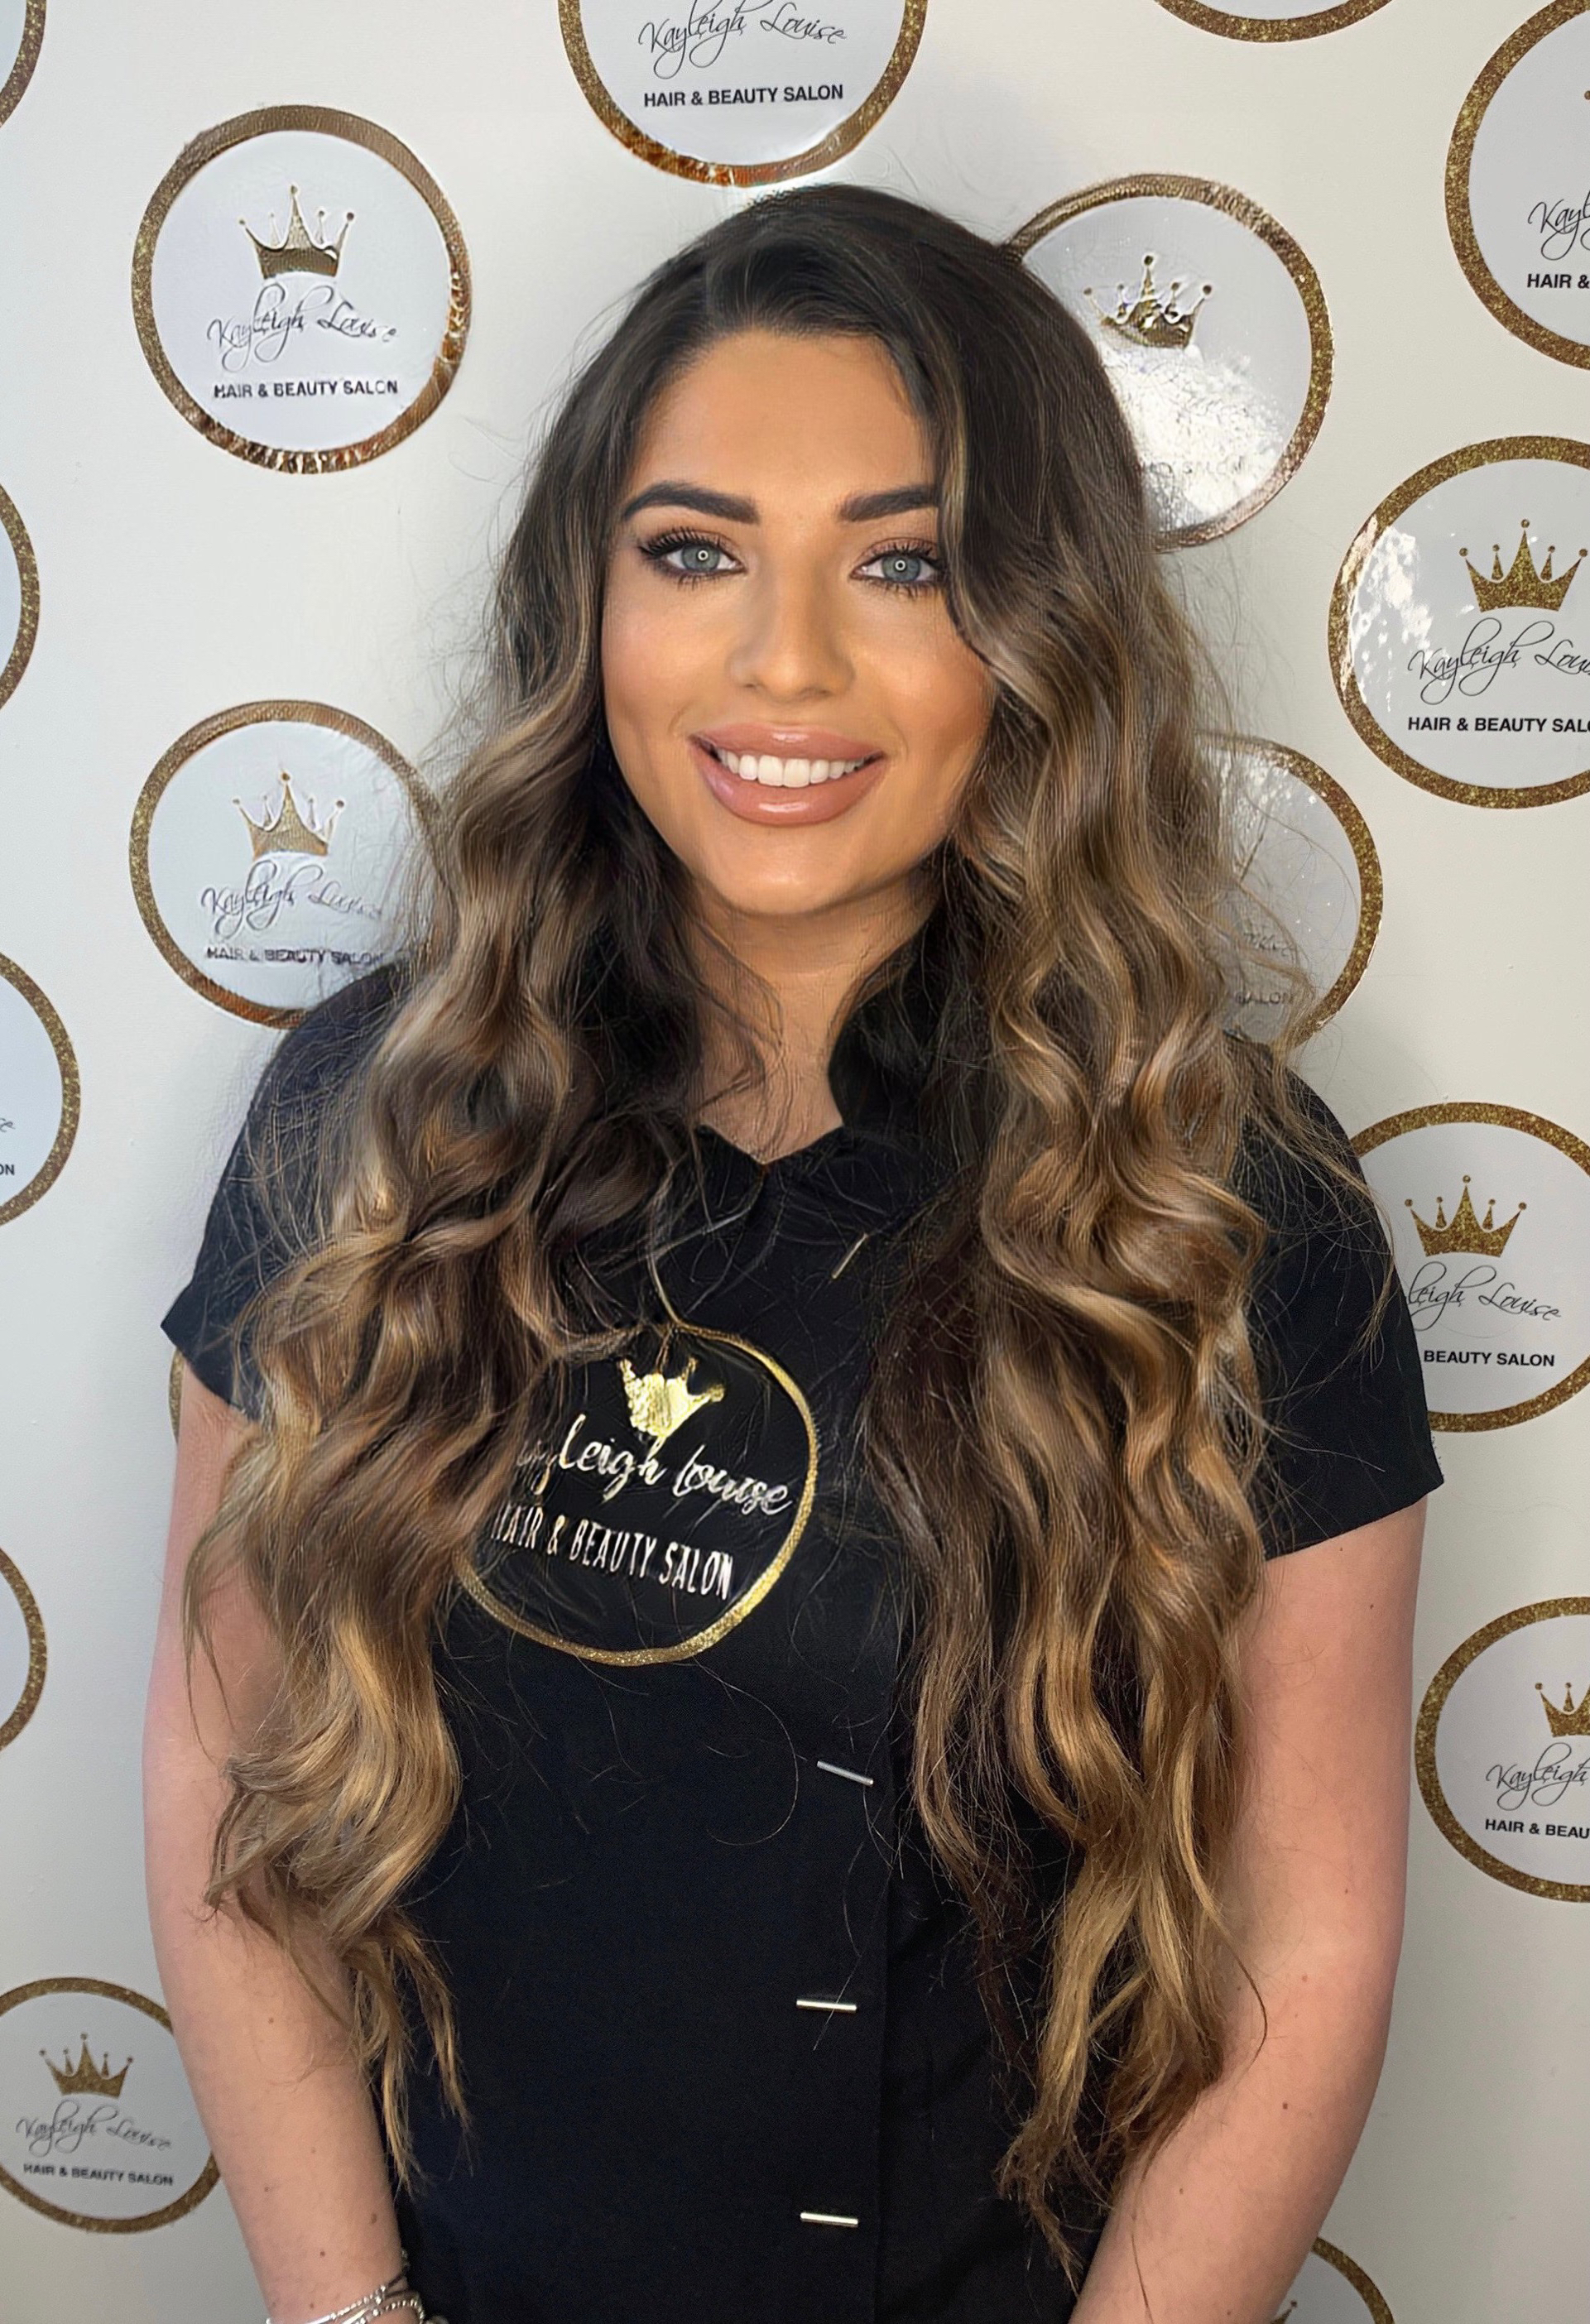 Kayleigh Louise Edwards opened the salon in 2016